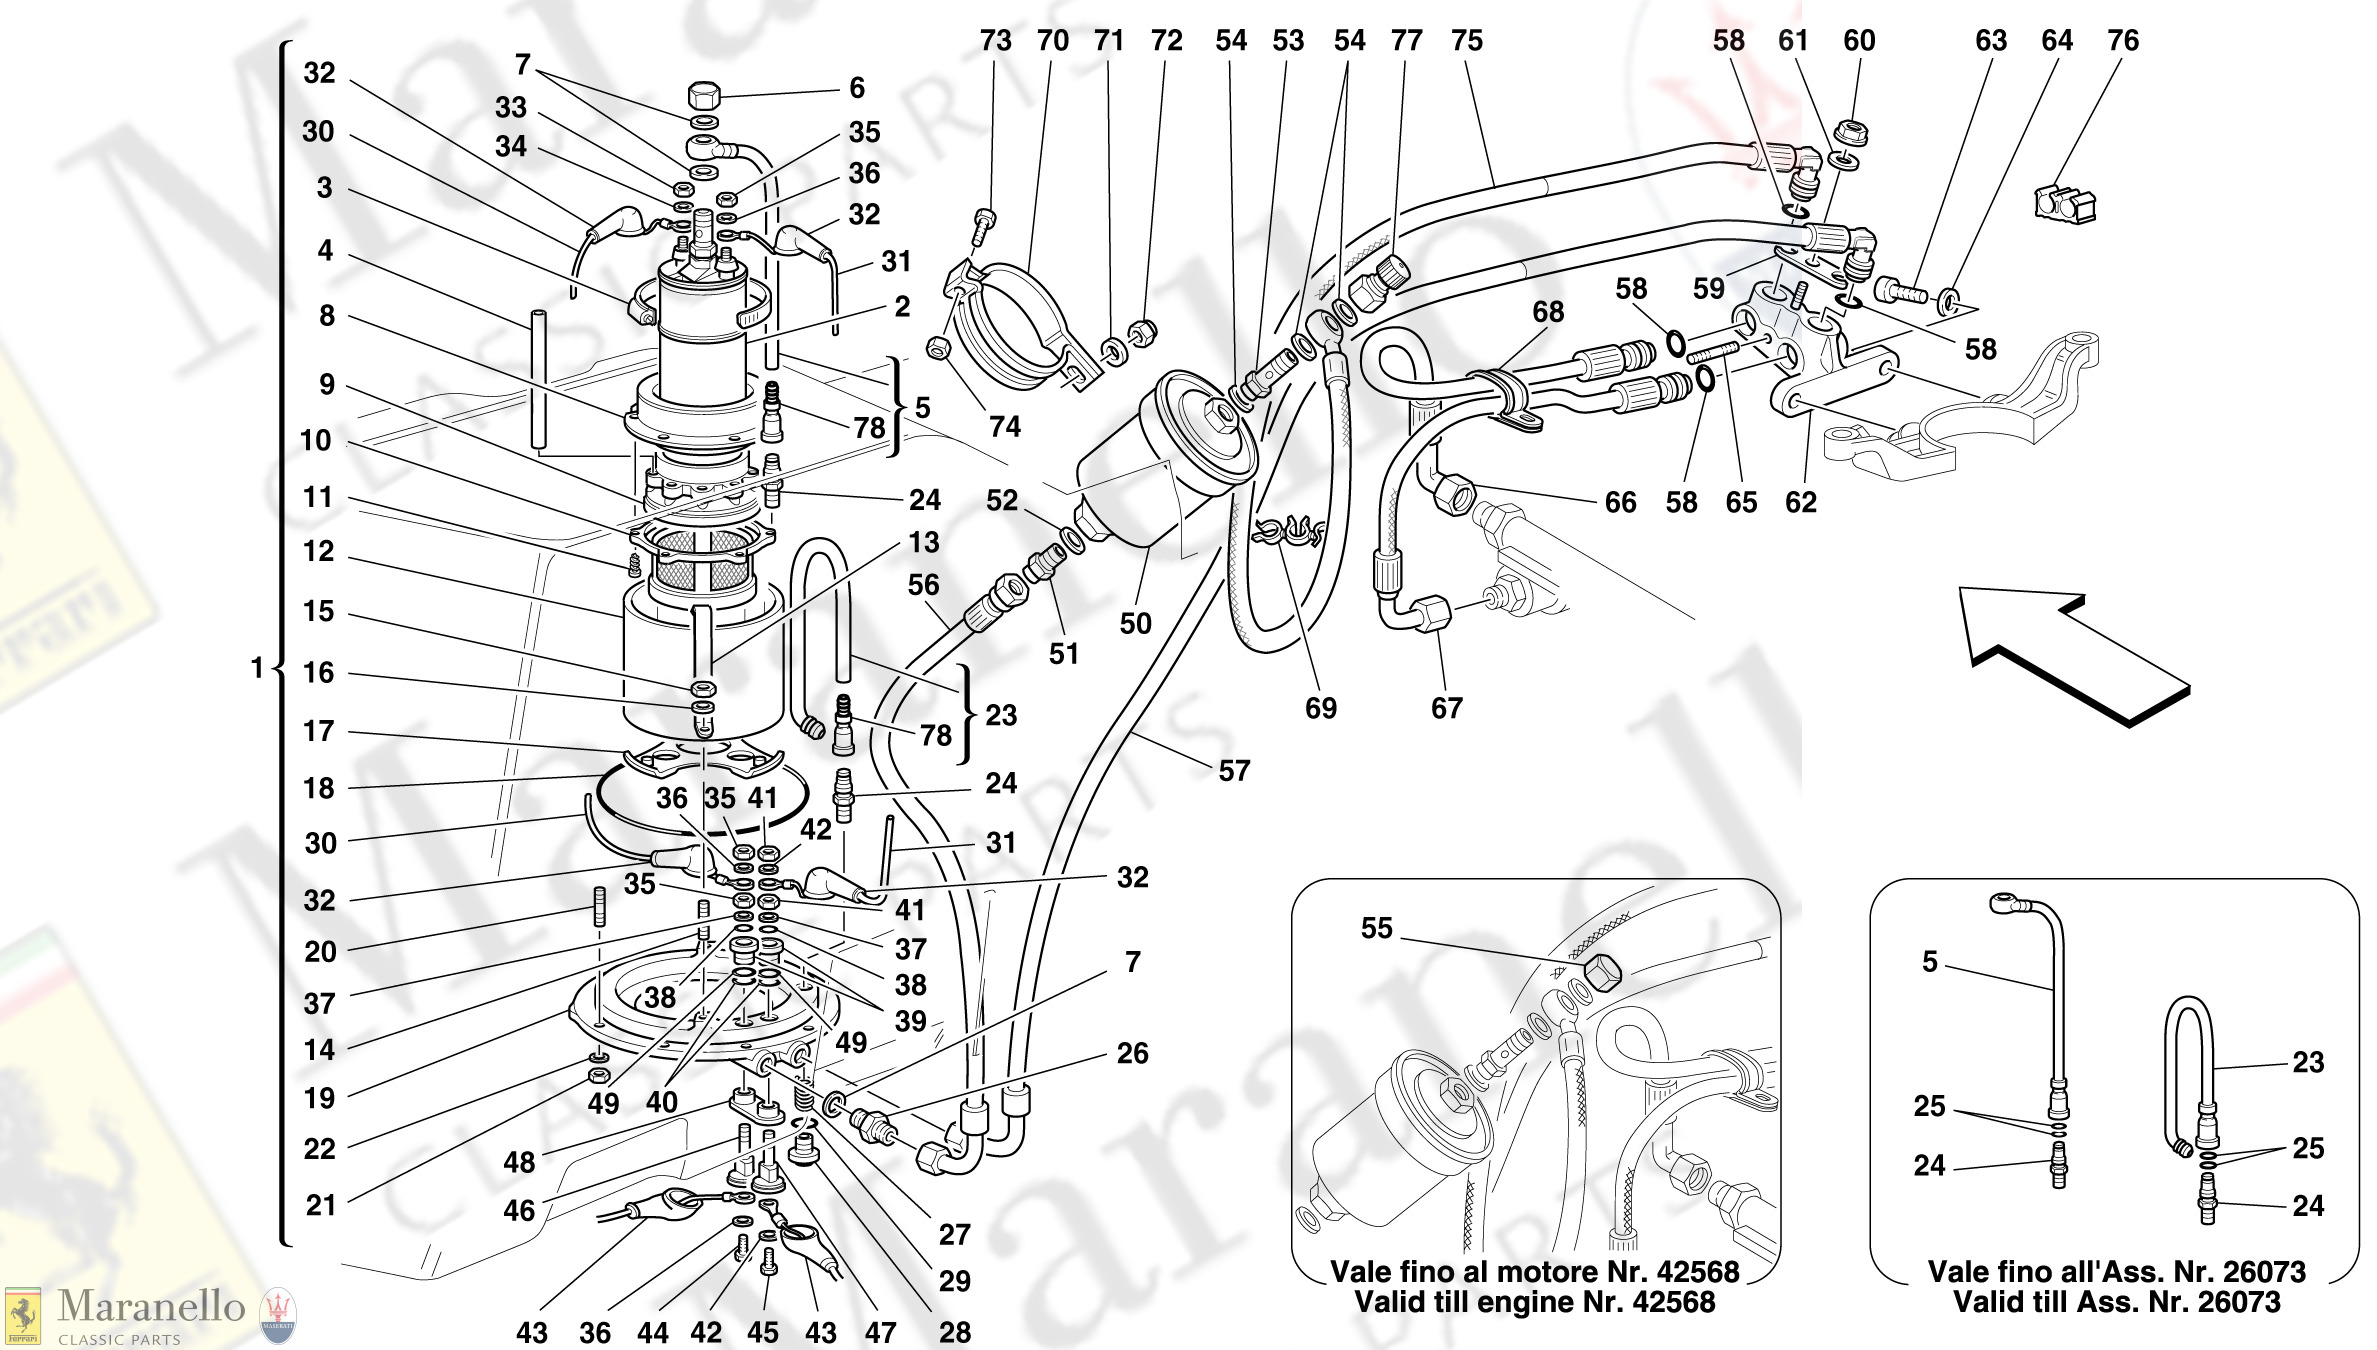 009 - Fuel Pump And Pipes